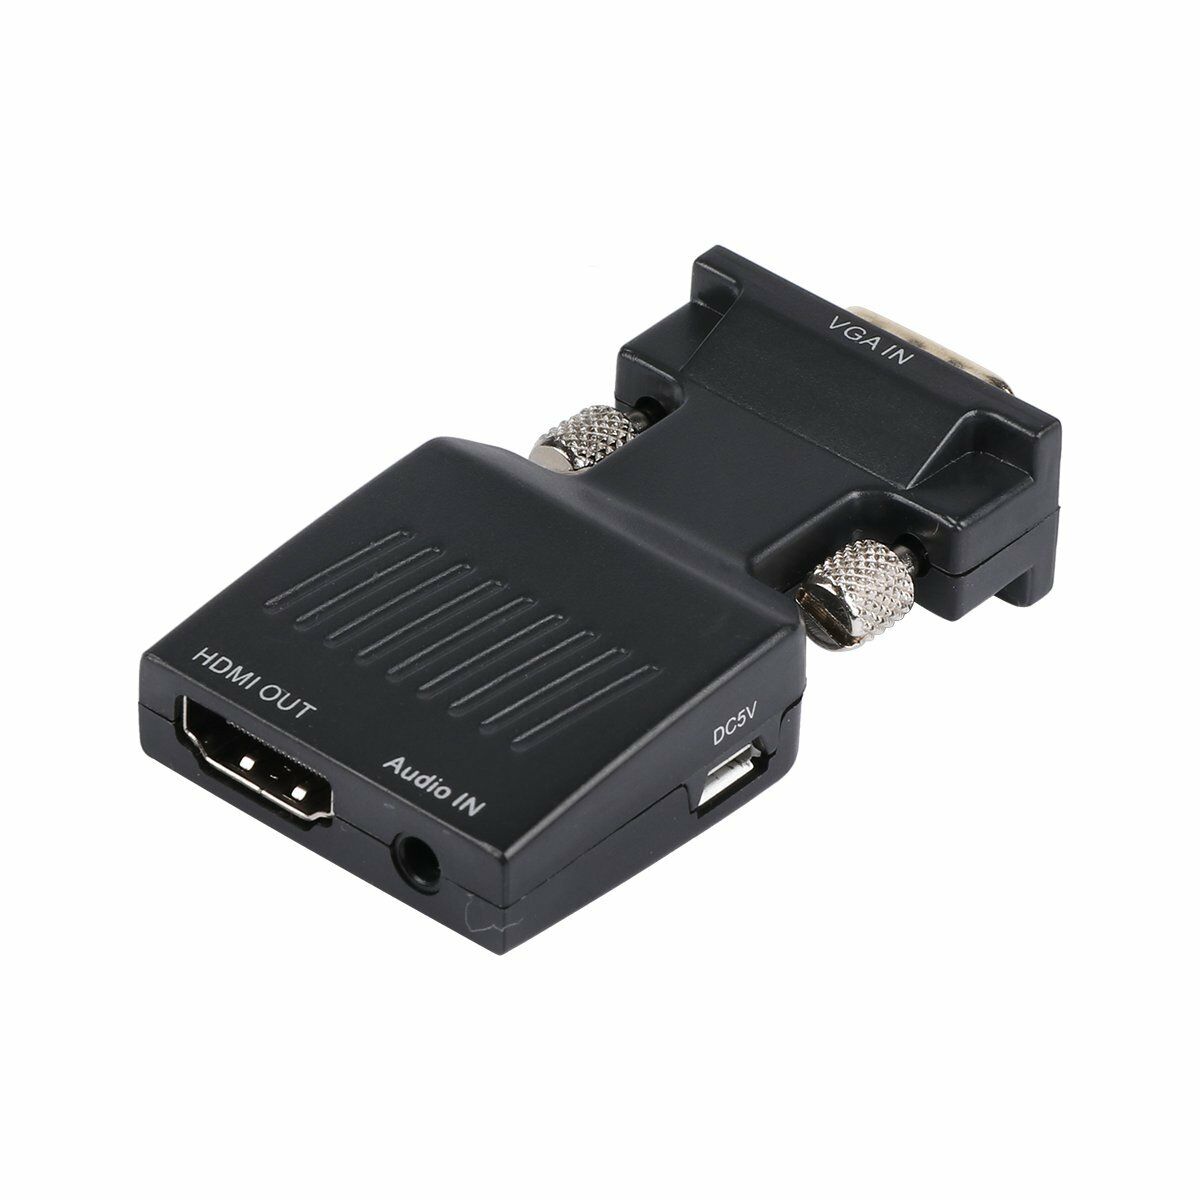 VGA to HDMI 1080P AV Converter HDTV Audio Video Cable Adapter for PC DVD STB black_VGA to HDMI